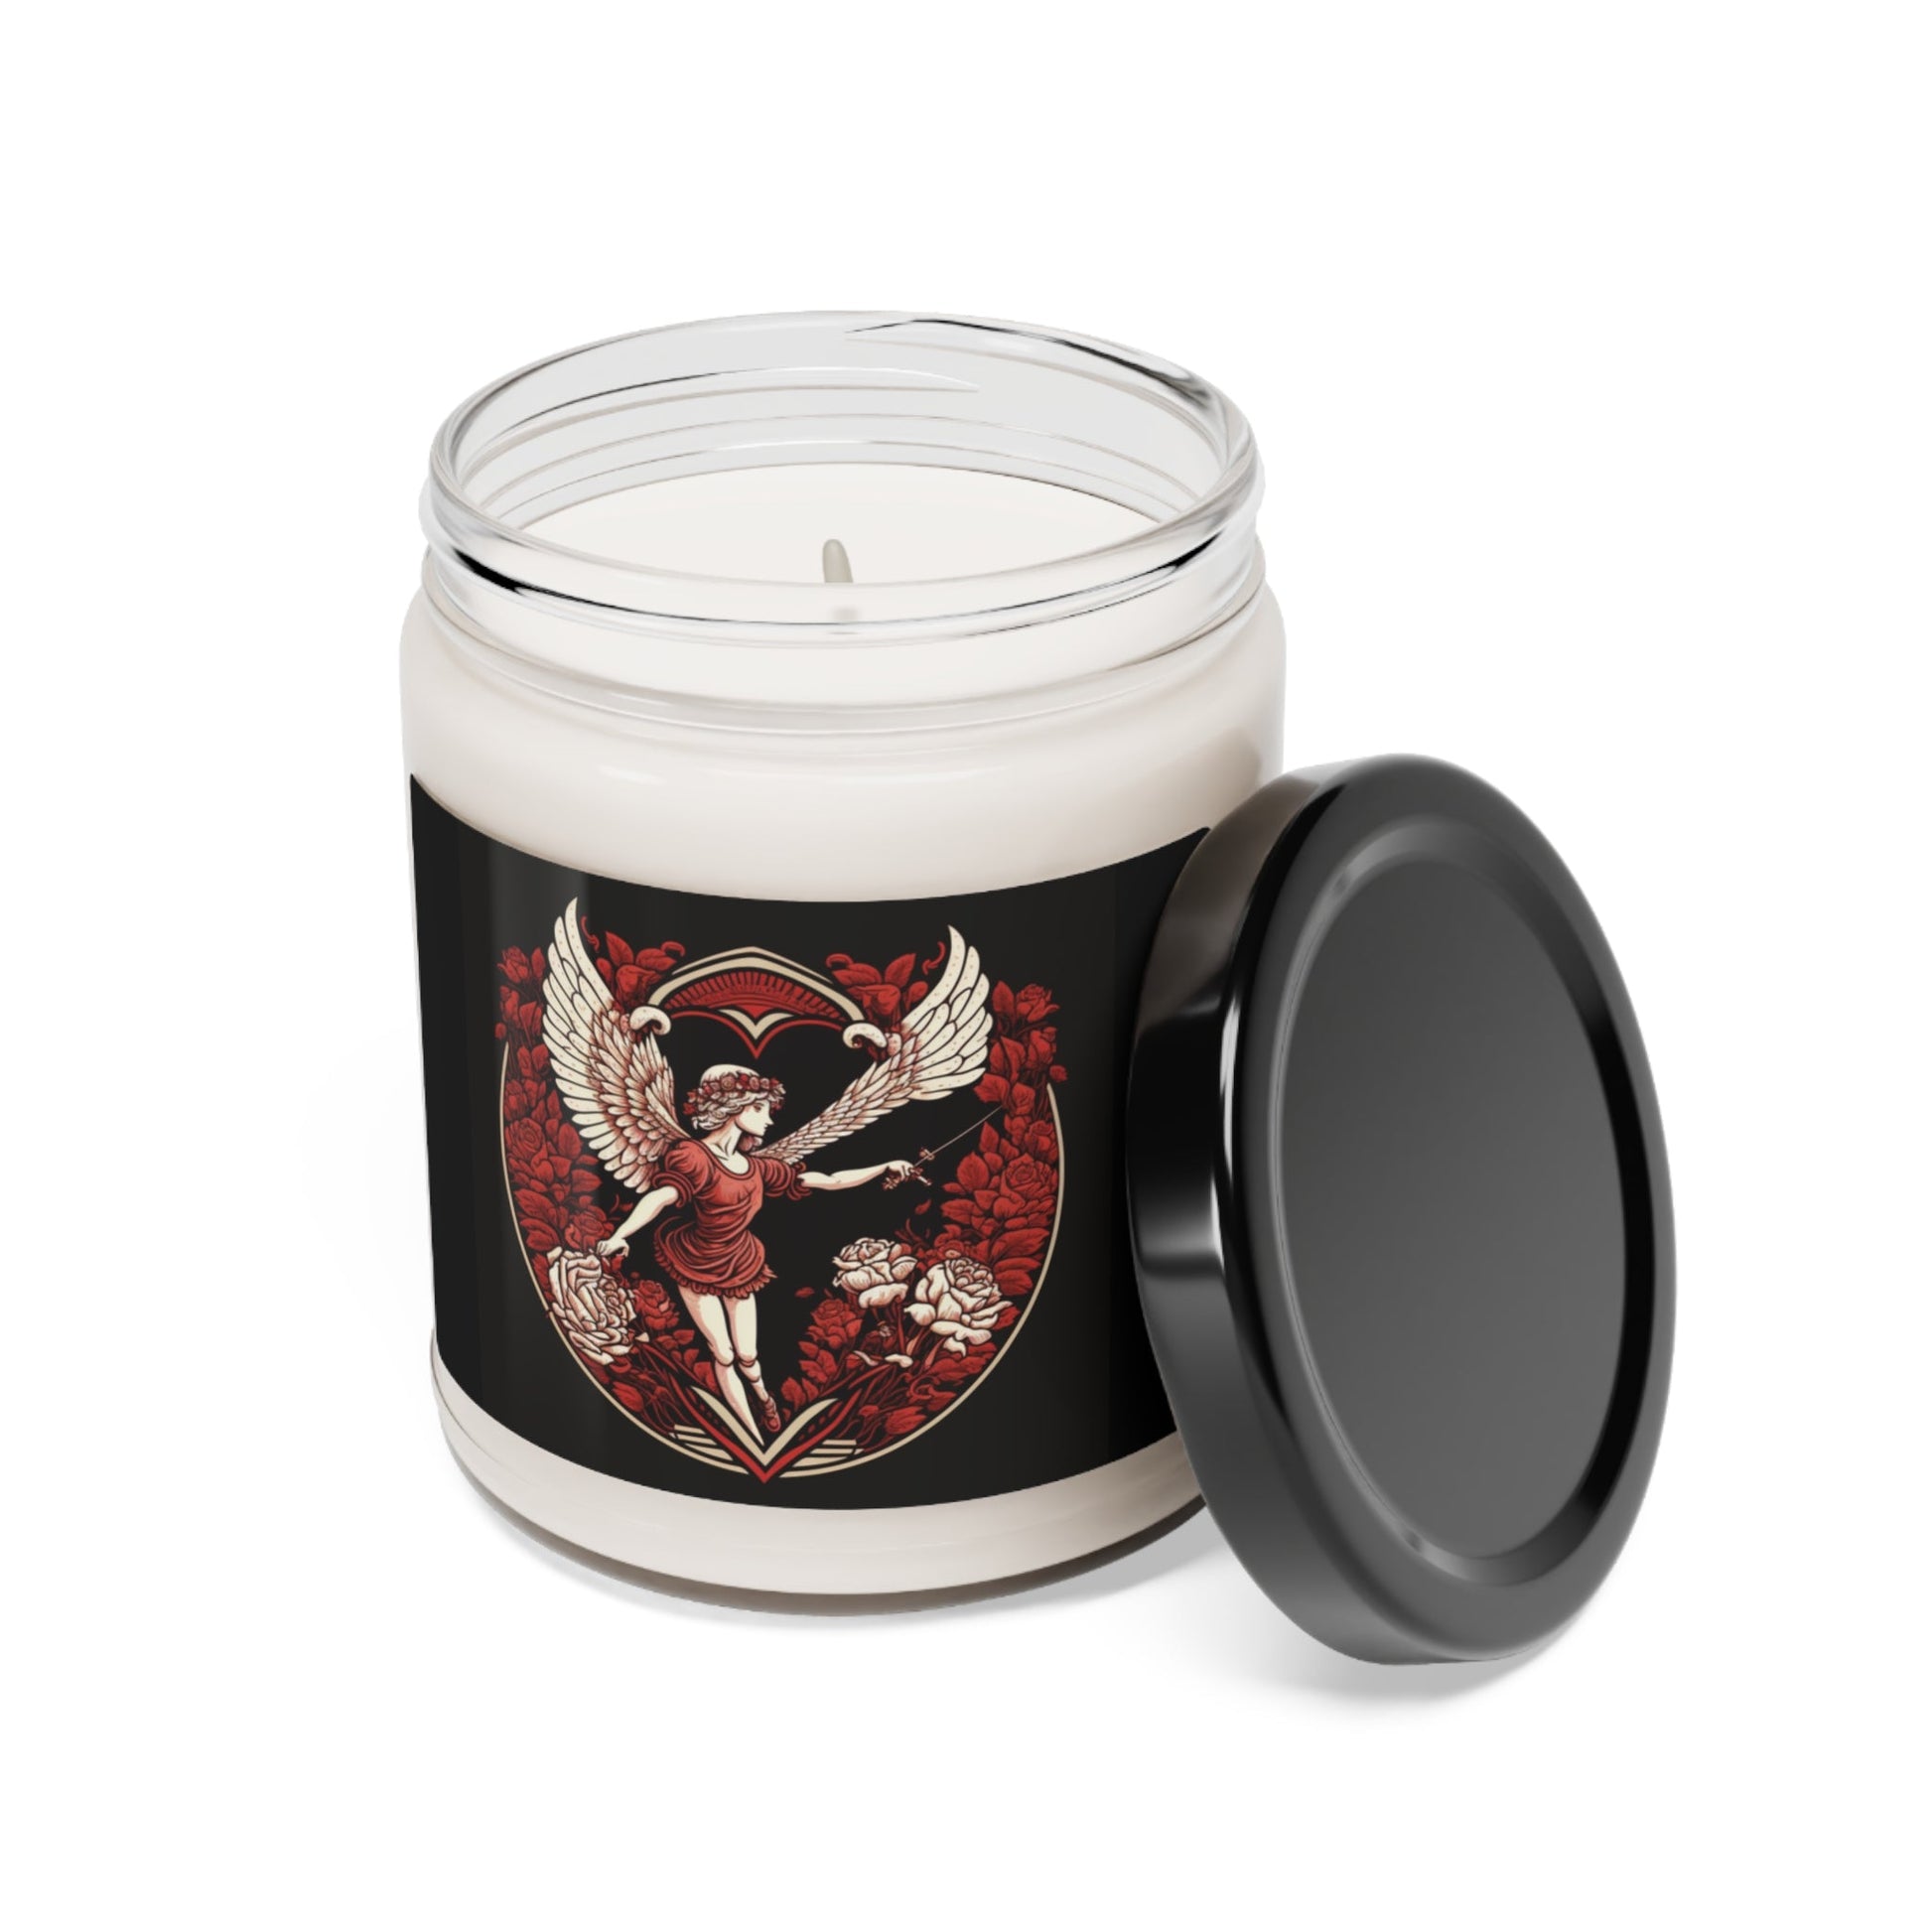 Cupid Is waiting To Shot His Arrow Scented Soy Candle, 9oz-Shalav5